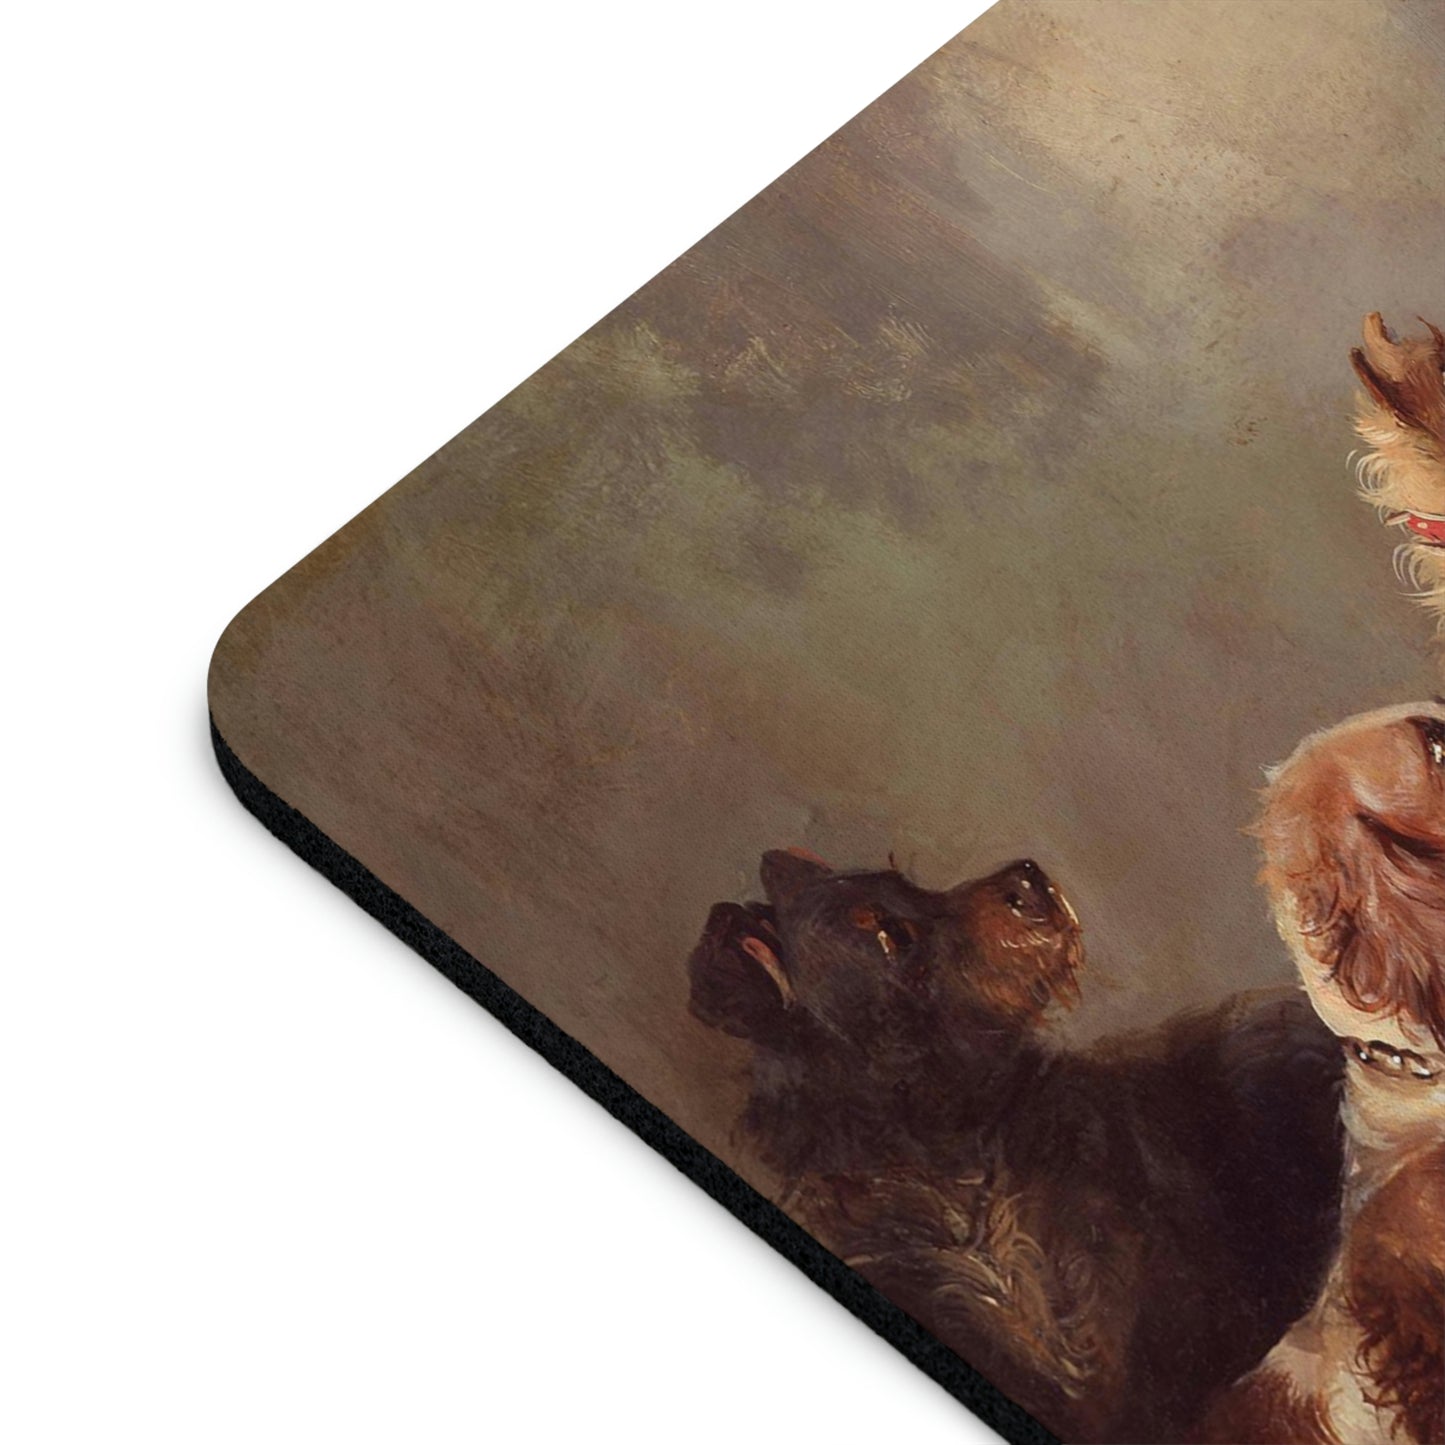 George Armfield: "The Great Debate" – Mouse Pad